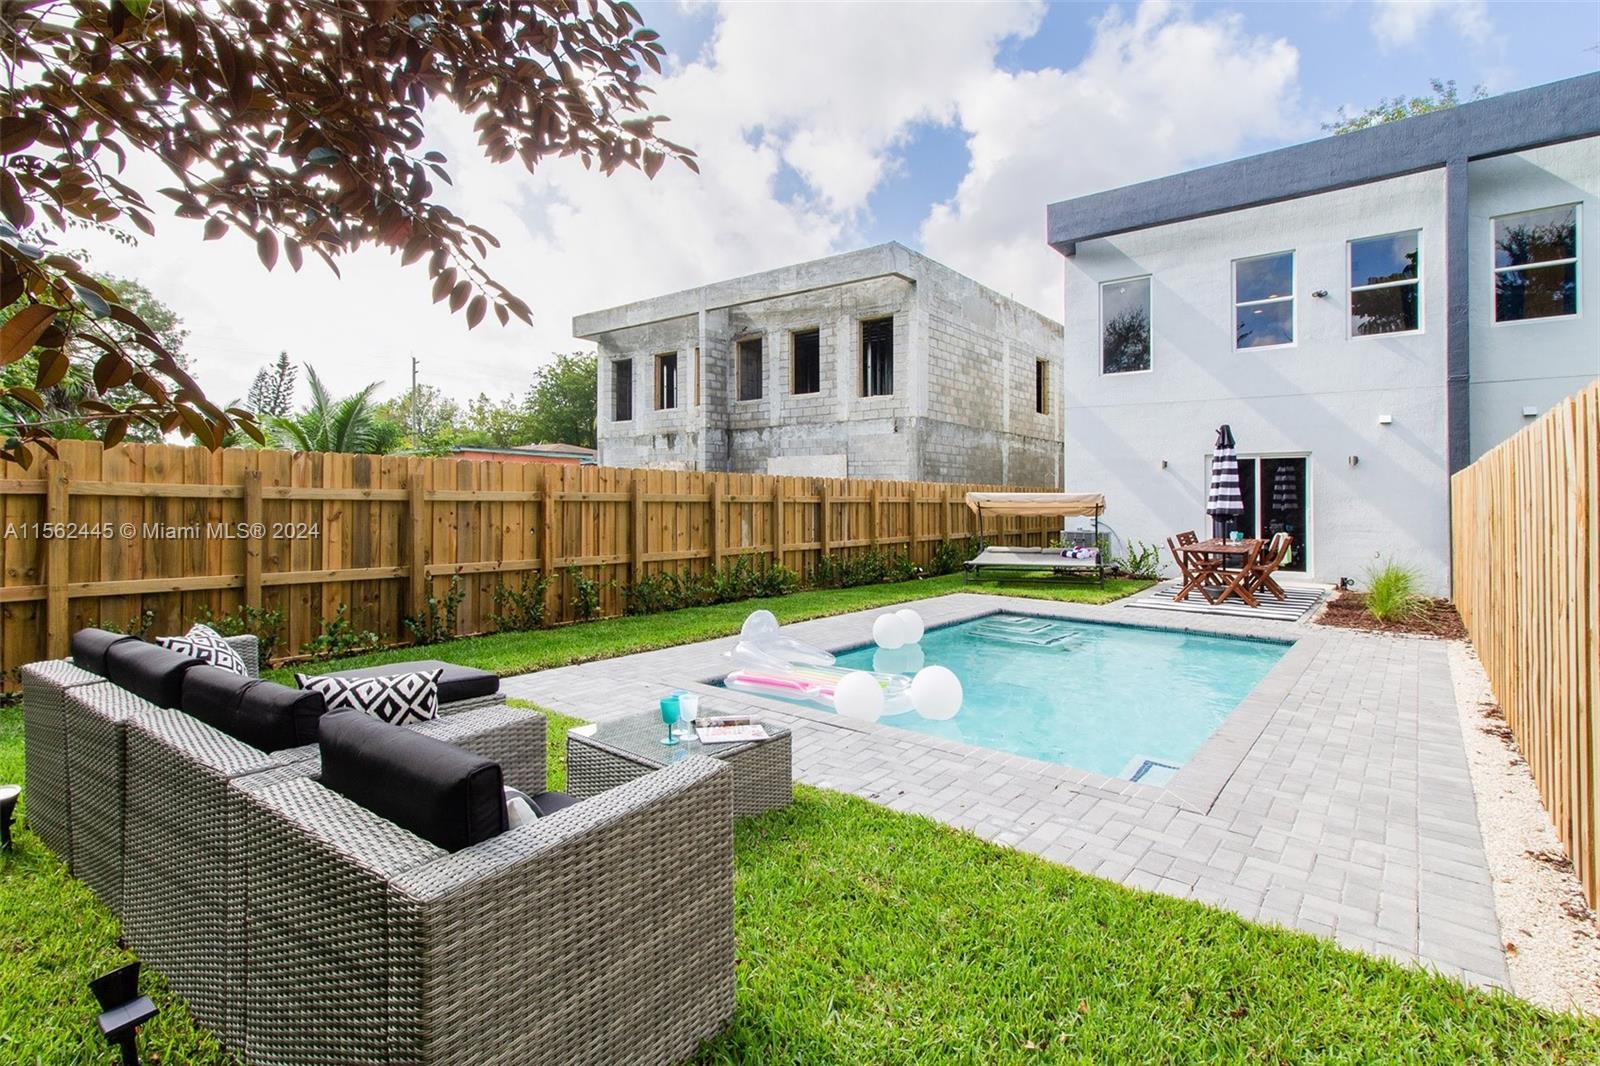 Photo of 5129 NW 5th Ave in Miami, FL